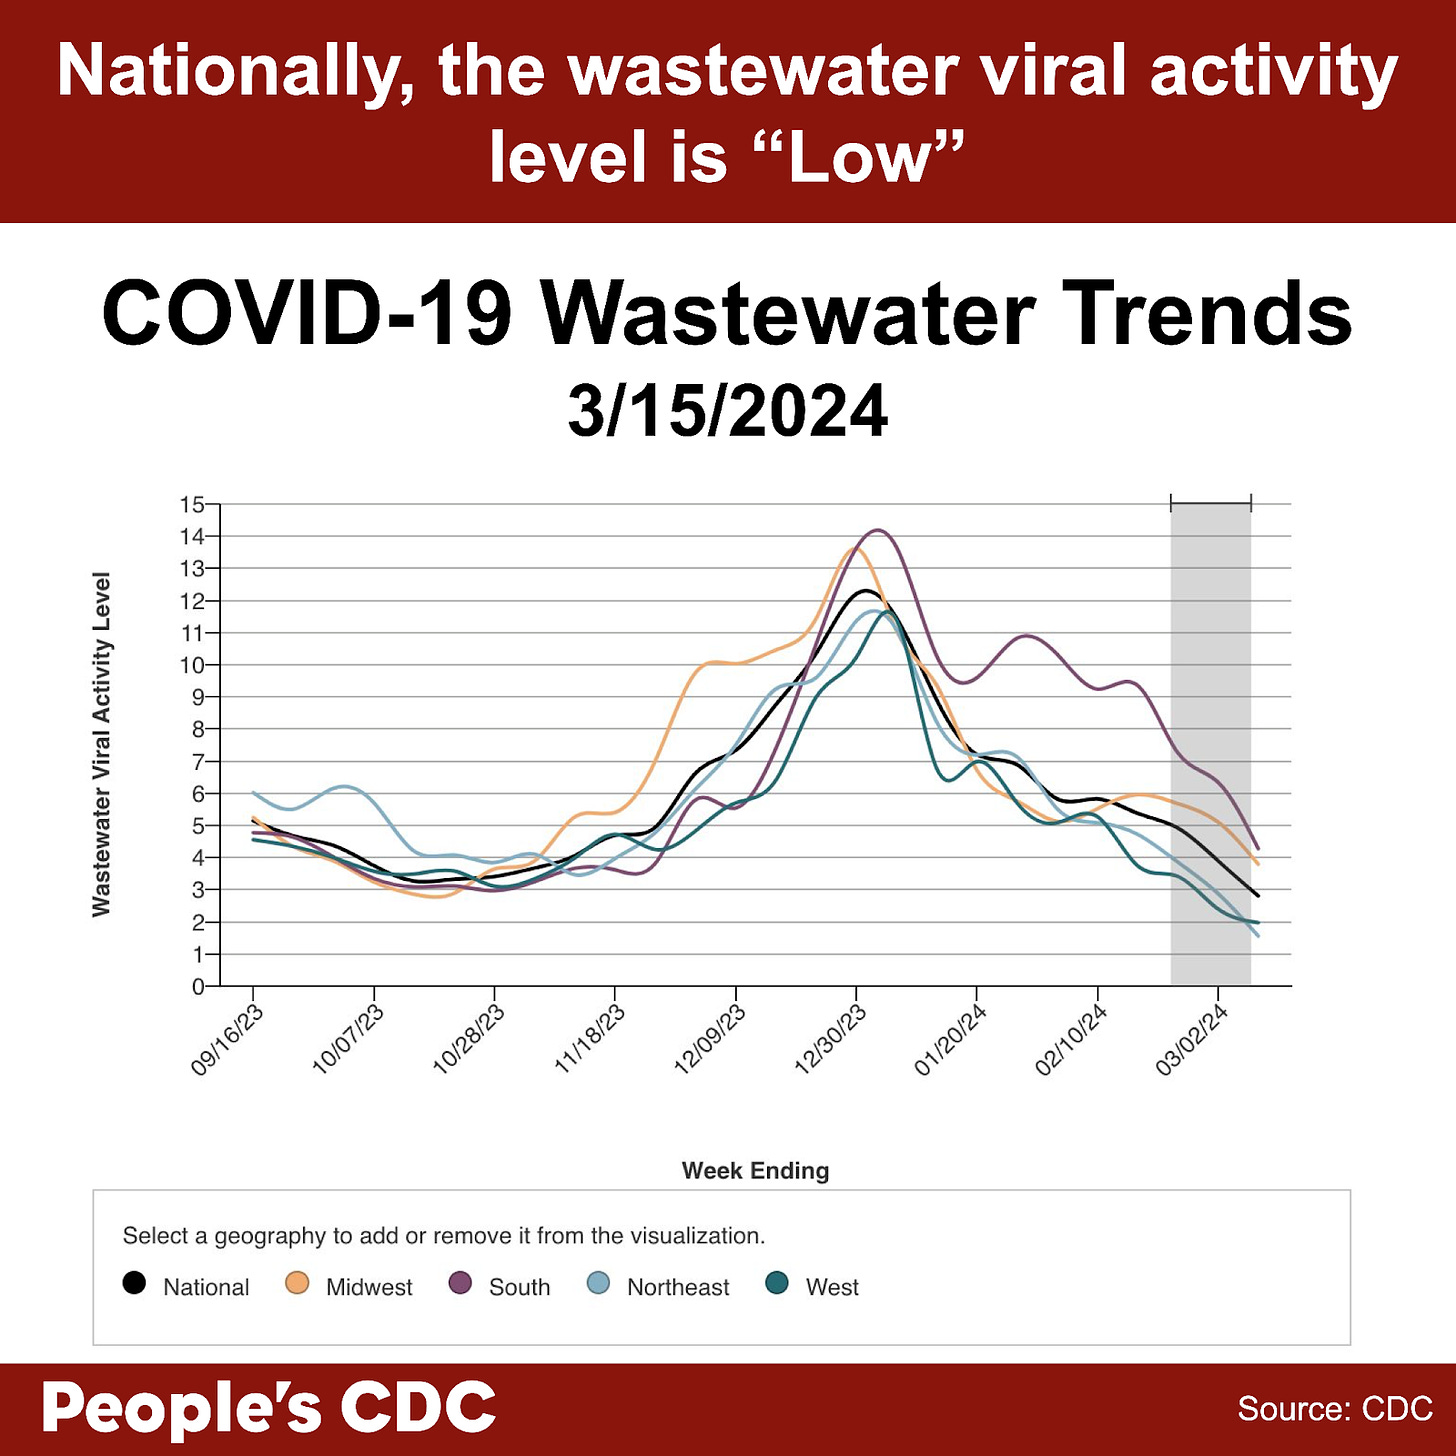 A line graph with “Wastewater Viral Activity Level” indicated on the left-hand vertical axis, going from 0-15, and “week ending” across the horizontal axis, with date labels ranging from 9/16/23 to 2/10/24, with the graph extending through 3/9/24. A key at the bottom indicates line colors. National is black, Midwest is orange, South is purple, Northeast is light blue, and West is green. Viral activity levels nationally peaked around 12/30/23 at 12. Overall, levels have trended downward since then, though the South began trending upwards again in late January 2024, peaking in the week ending 1/27/24 at 10.08. Within the gray-shaded provisional data provided for the last 2 weeks, all geographical regions are trending downward. Text above the graph reads “Nationally, the wastewater viral activity level is ‘Low.’ COVID-19 Wastewater Trends 3/15/2024. Text below: People’s CDC. Source: CDC.”